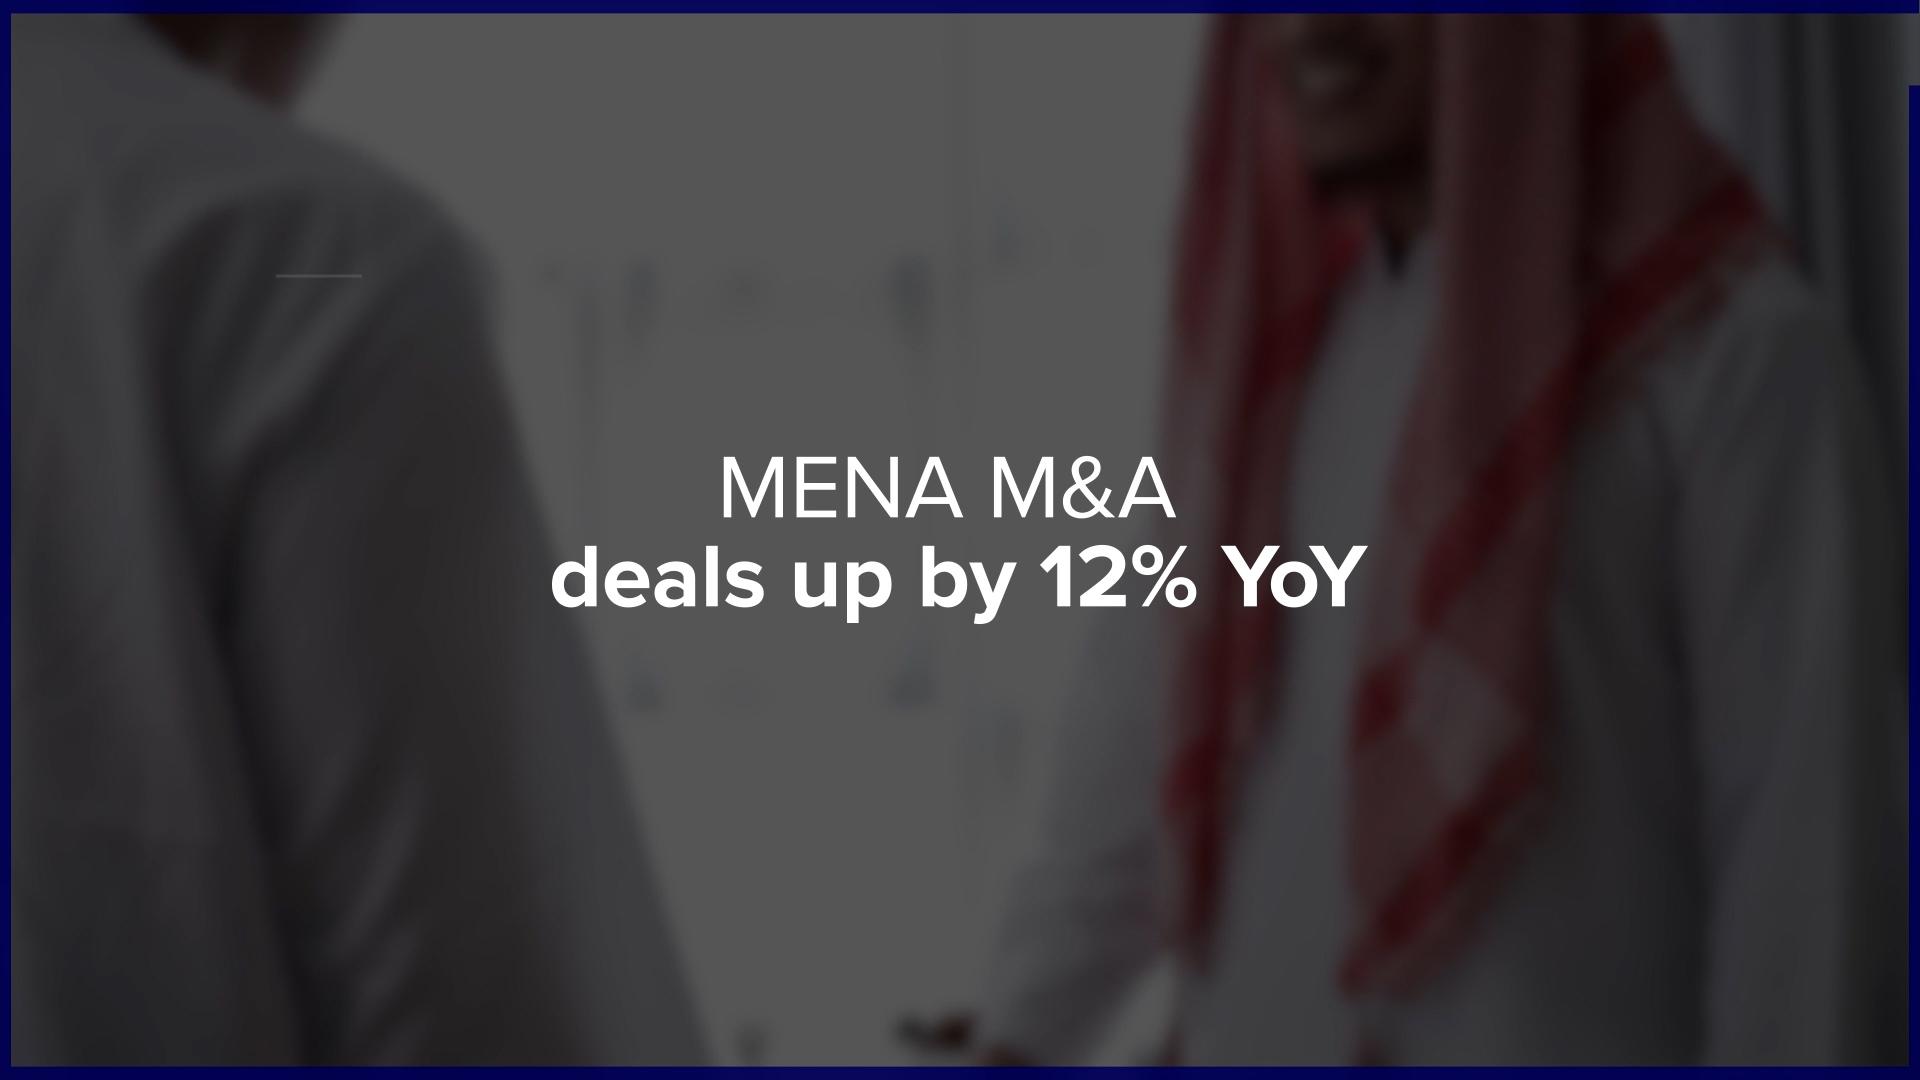 MENA M&A deals up by 12% YoY